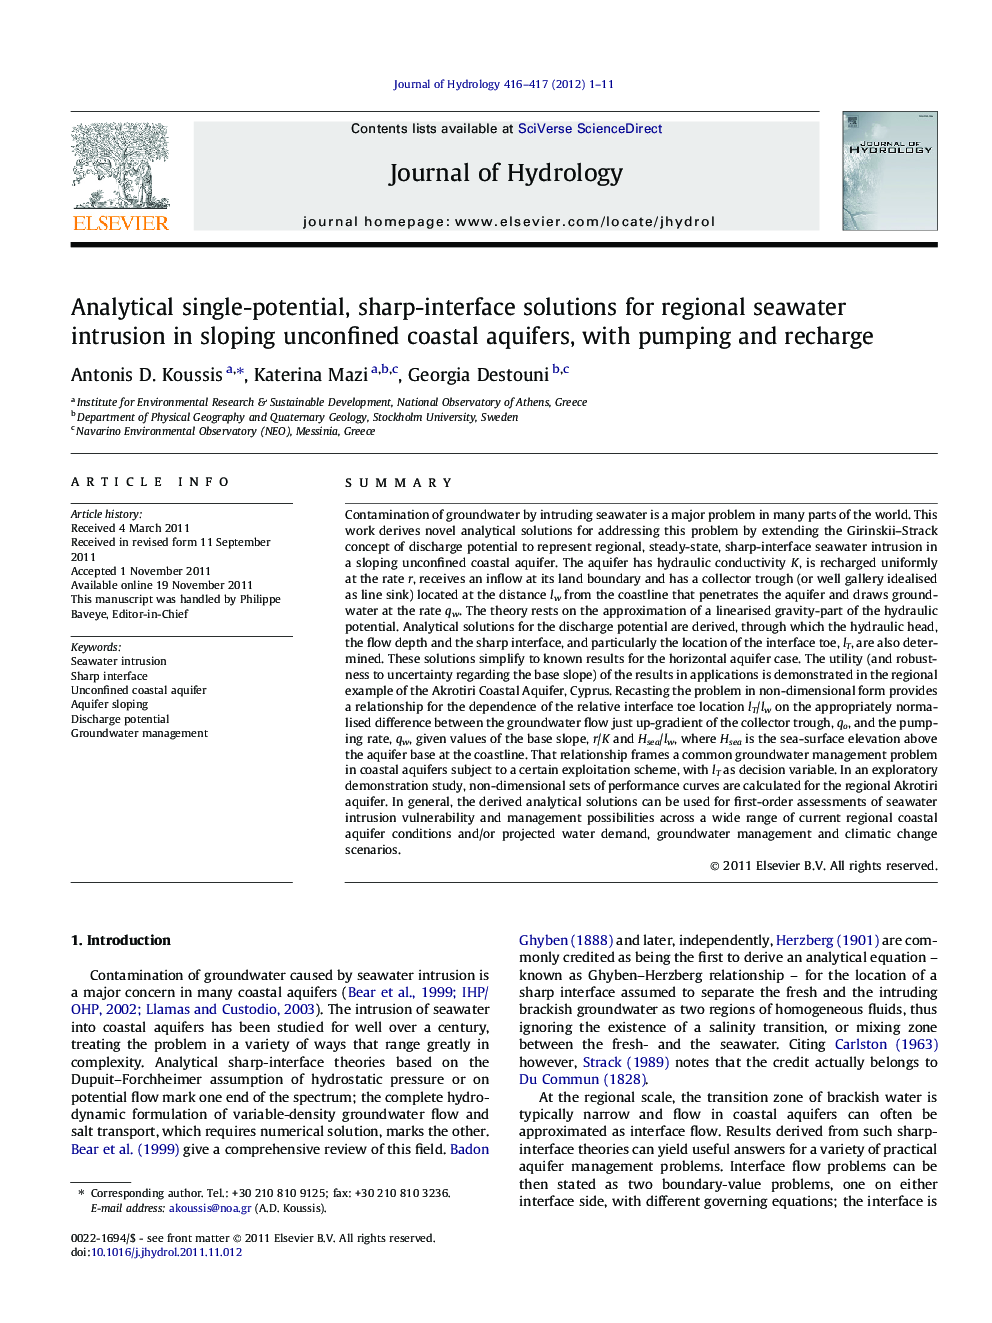 Analytical single-potential, sharp-interface solutions for regional seawater intrusion in sloping unconfined coastal aquifers, with pumping and recharge